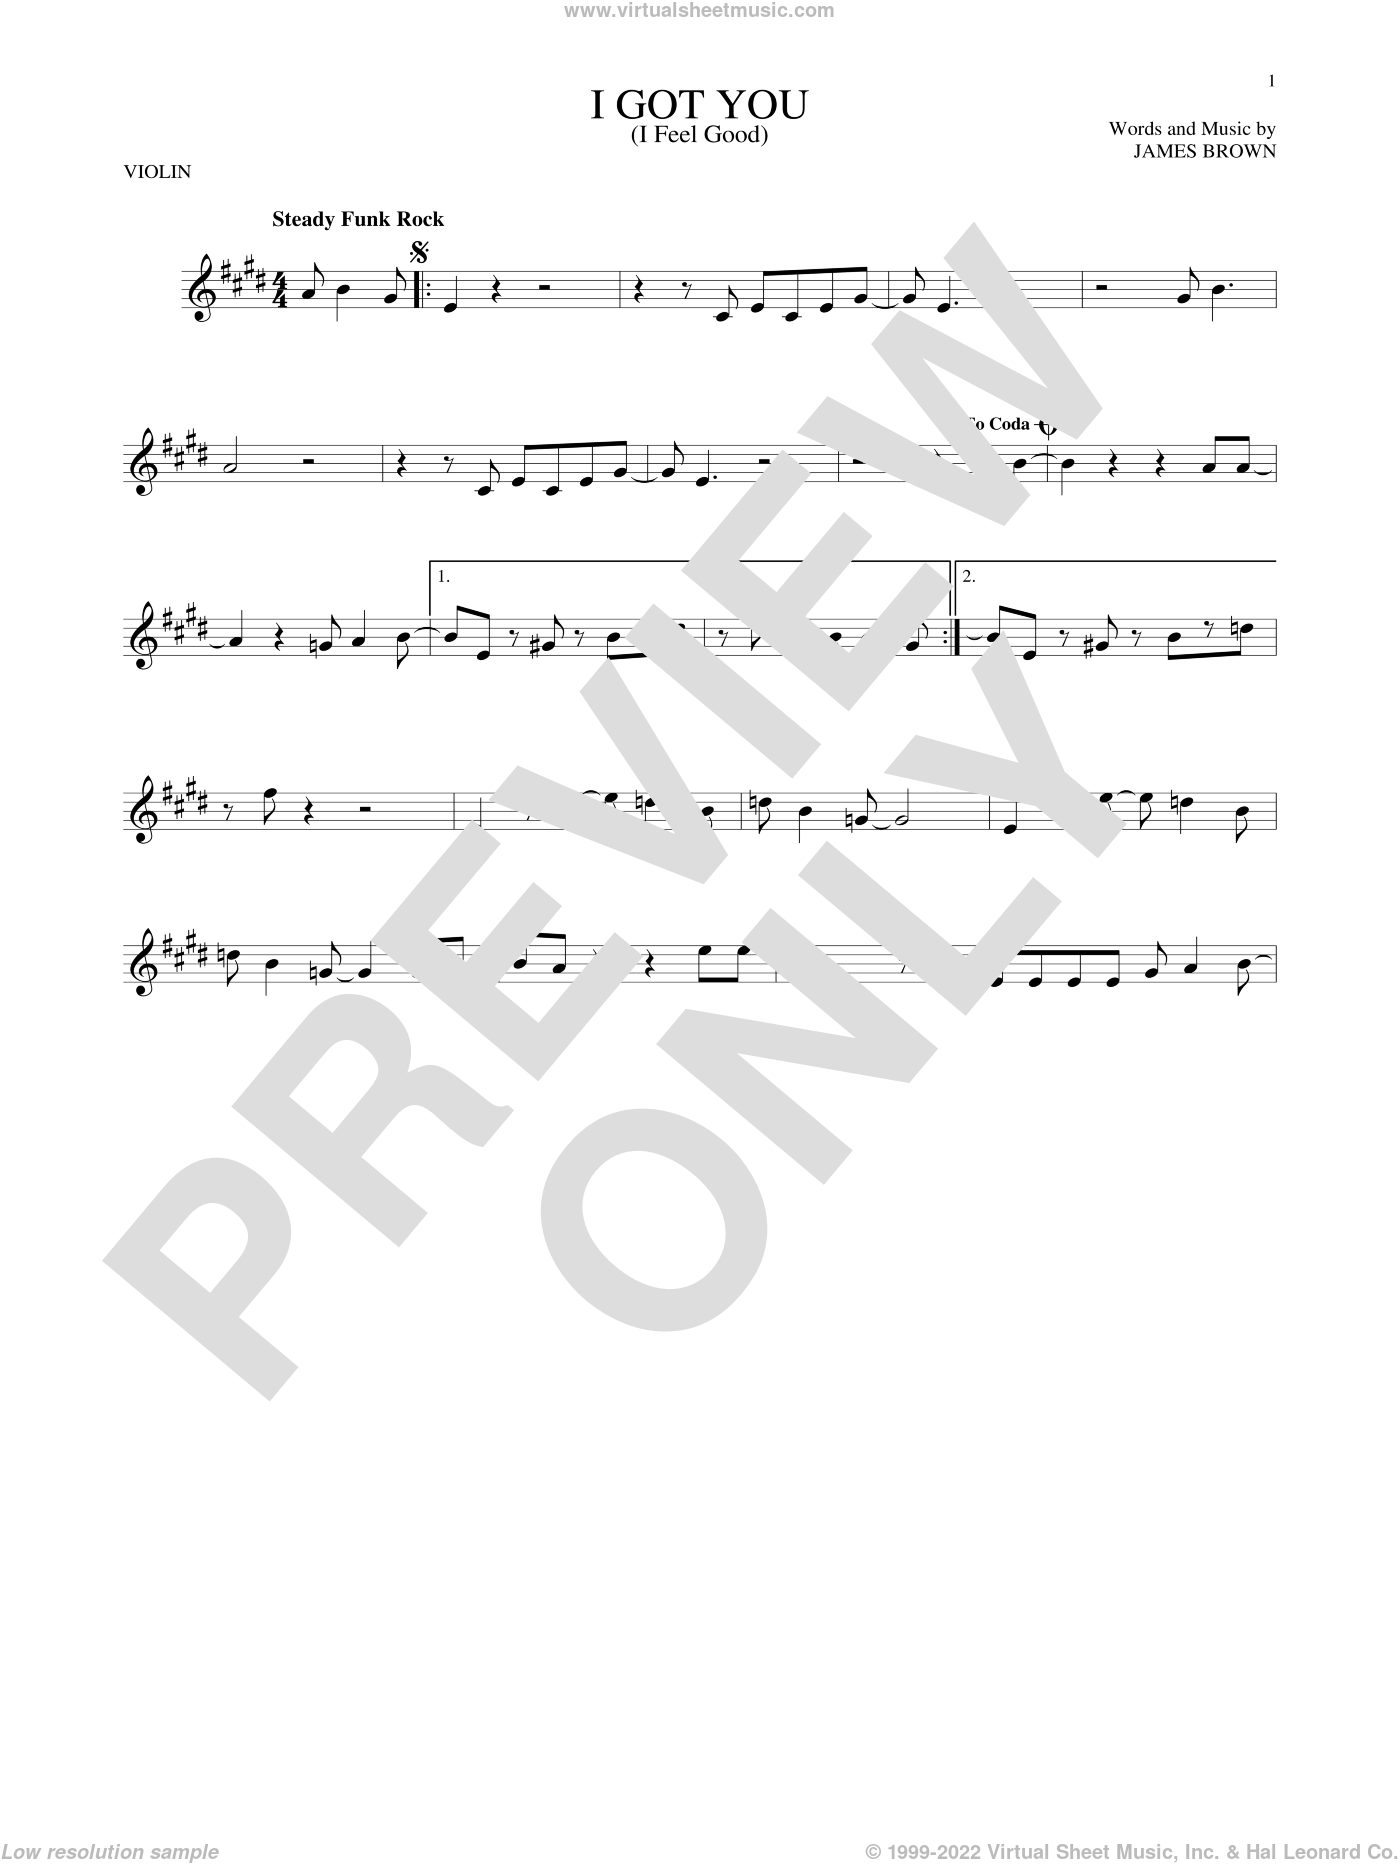 Back To You" Sheet Music by Louis Tomlinson; Bebe Rexha for Piano /Vocal/Chords - Sheet Music Now